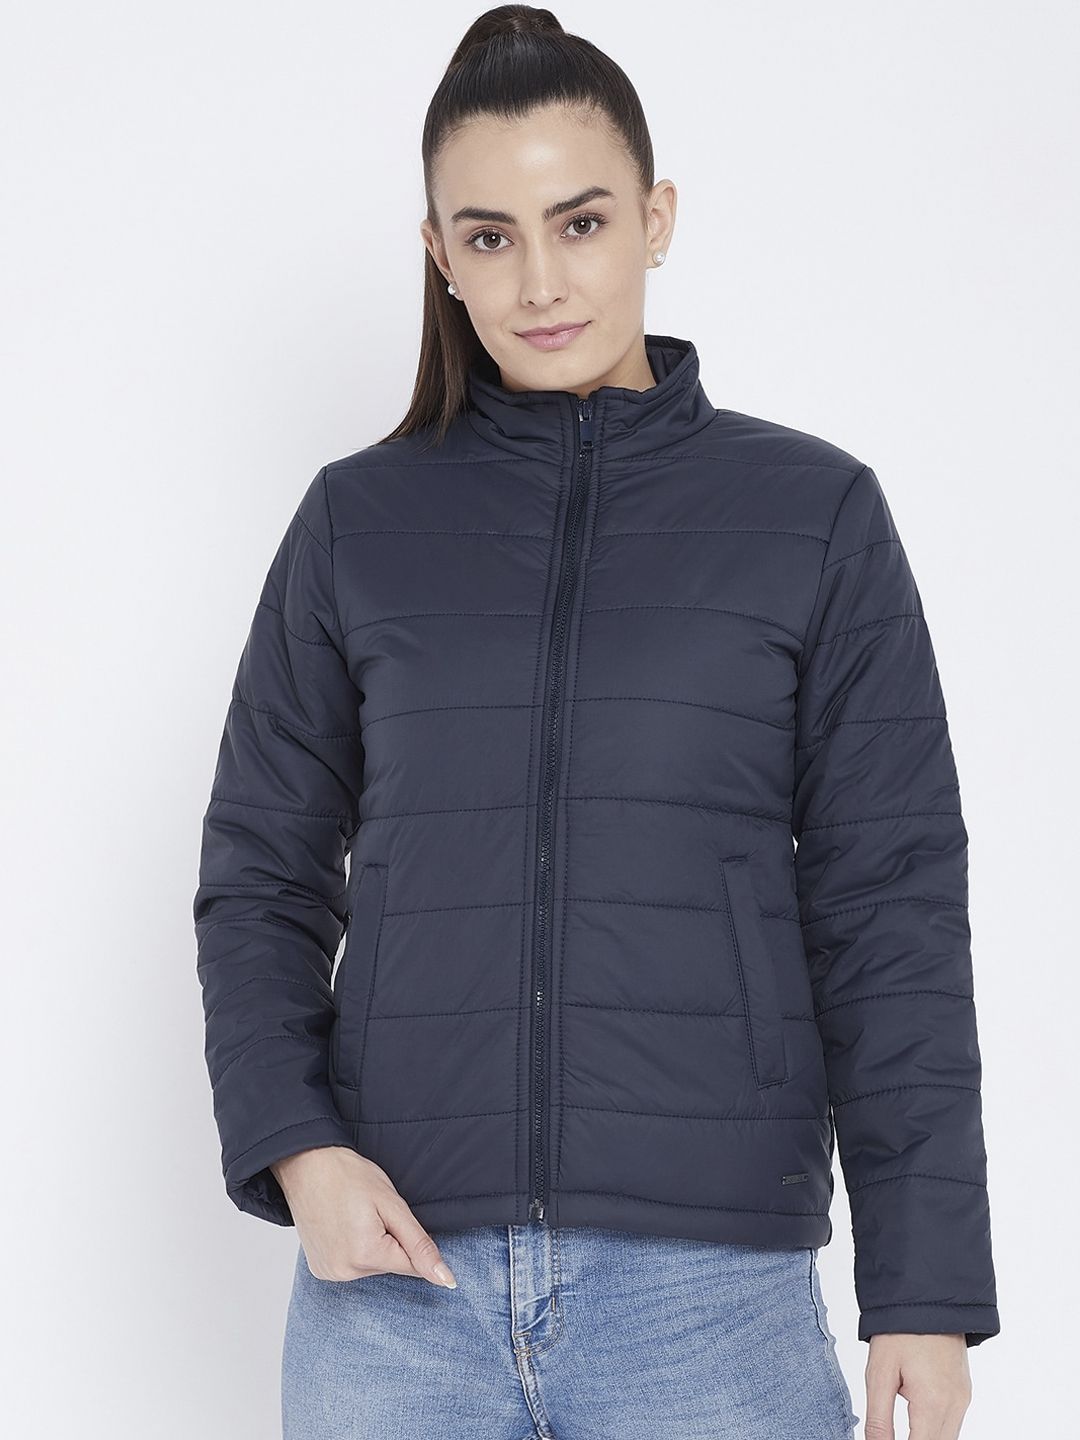 PERFKT-U Women Navy Blue Lightweight Antimicrobial Puffer Jacket Price in India